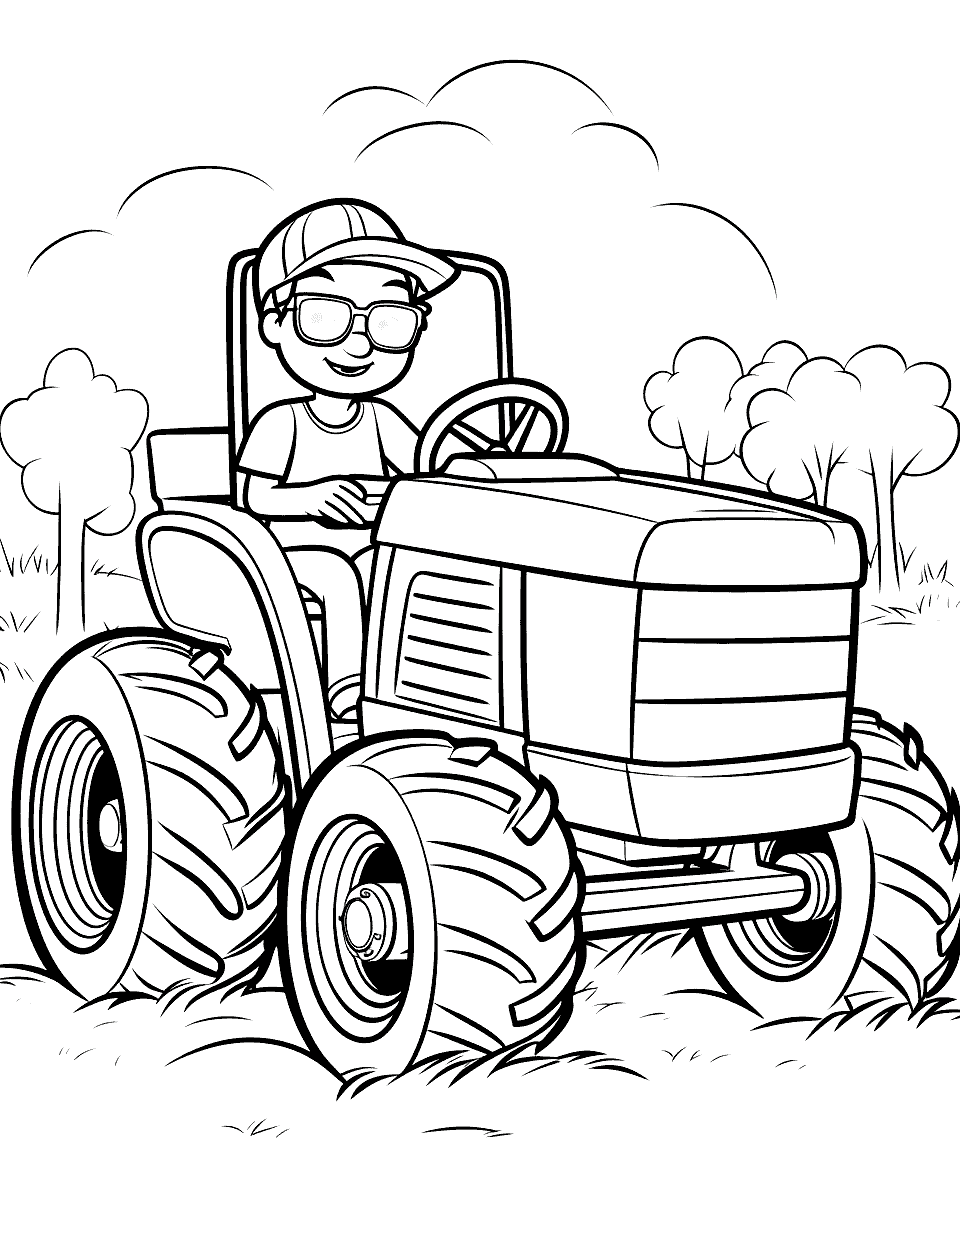 Blippi-Inspired Tractor Adventure Coloring Page - A colorful tractor in a style inspired by the children’s show character Blippi.